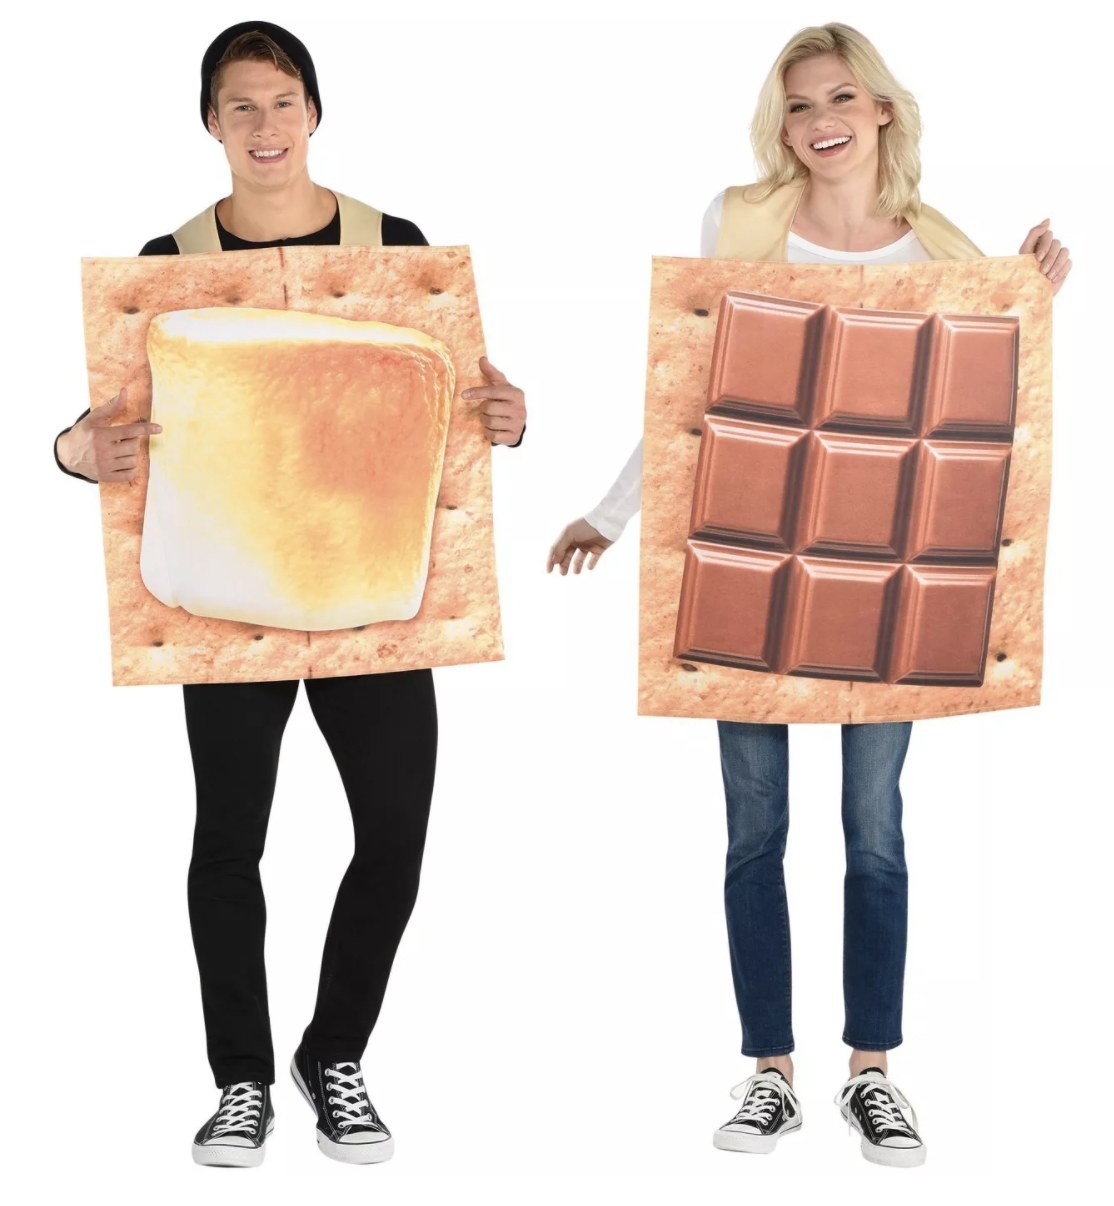 There are two adults: one is wearing a graham cracker with marshmallow tunic and another with a graham cracker and chocolate tunic